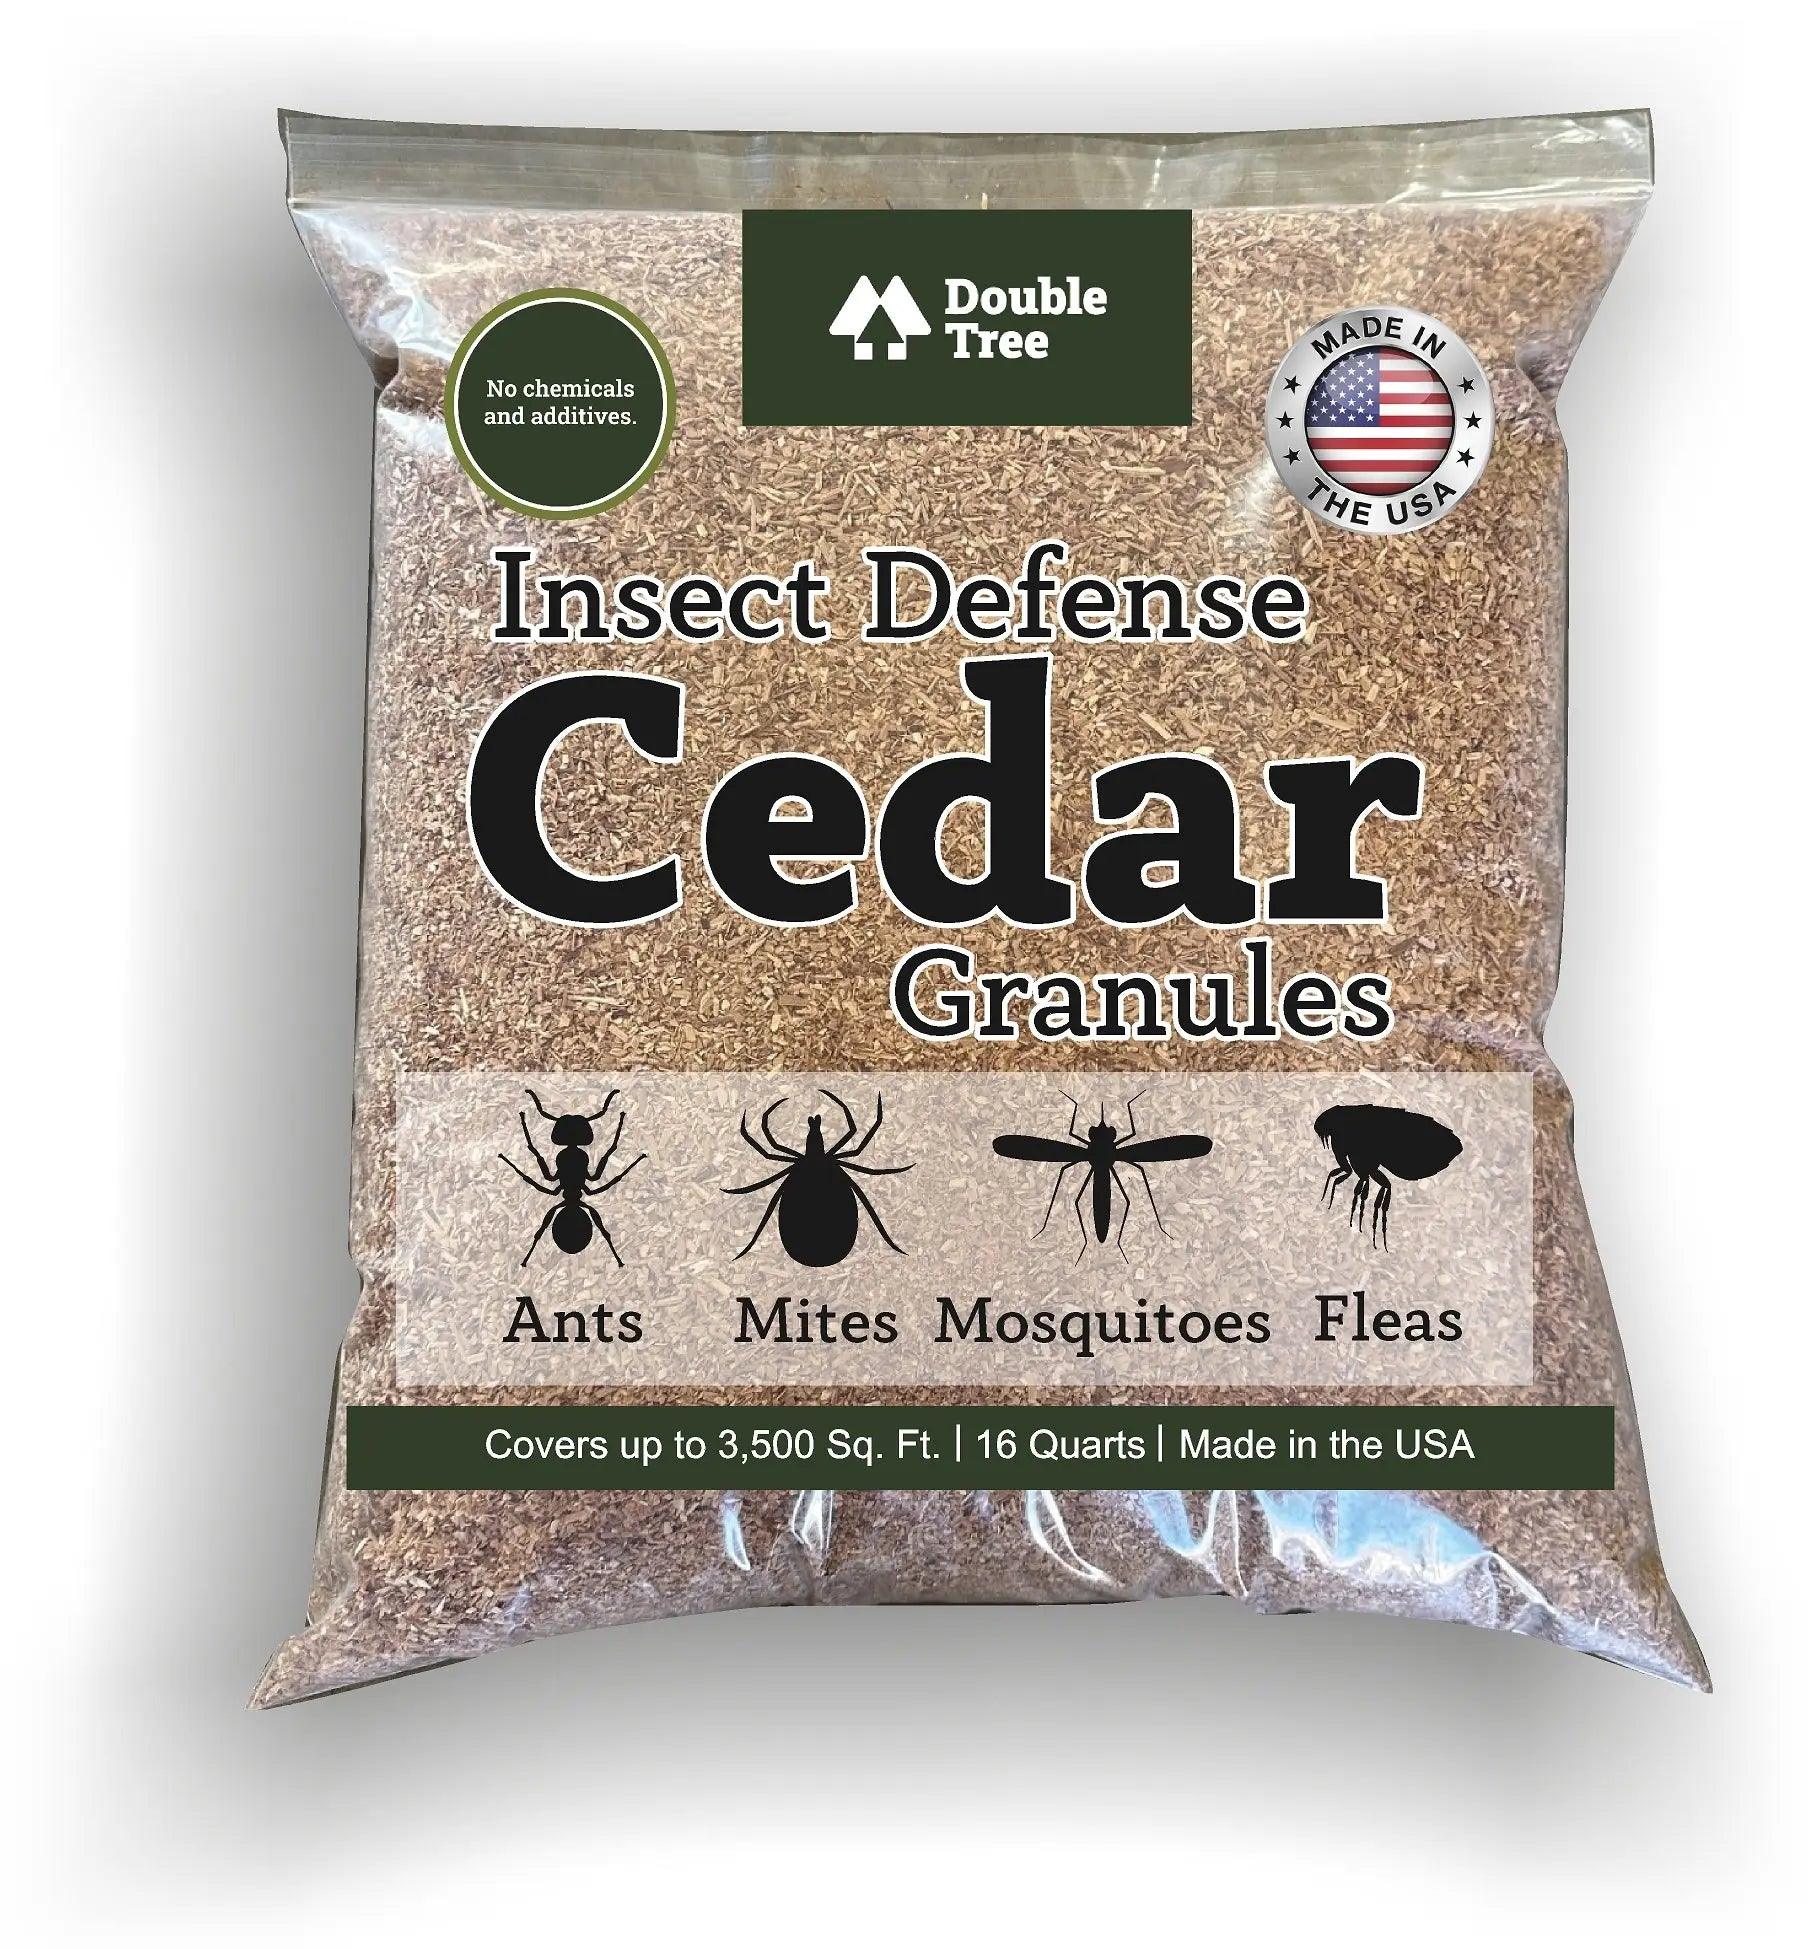 Insect Defense Cedar Granules - All-Natural, Pet and Family Safe! - Double Tree Forest Products